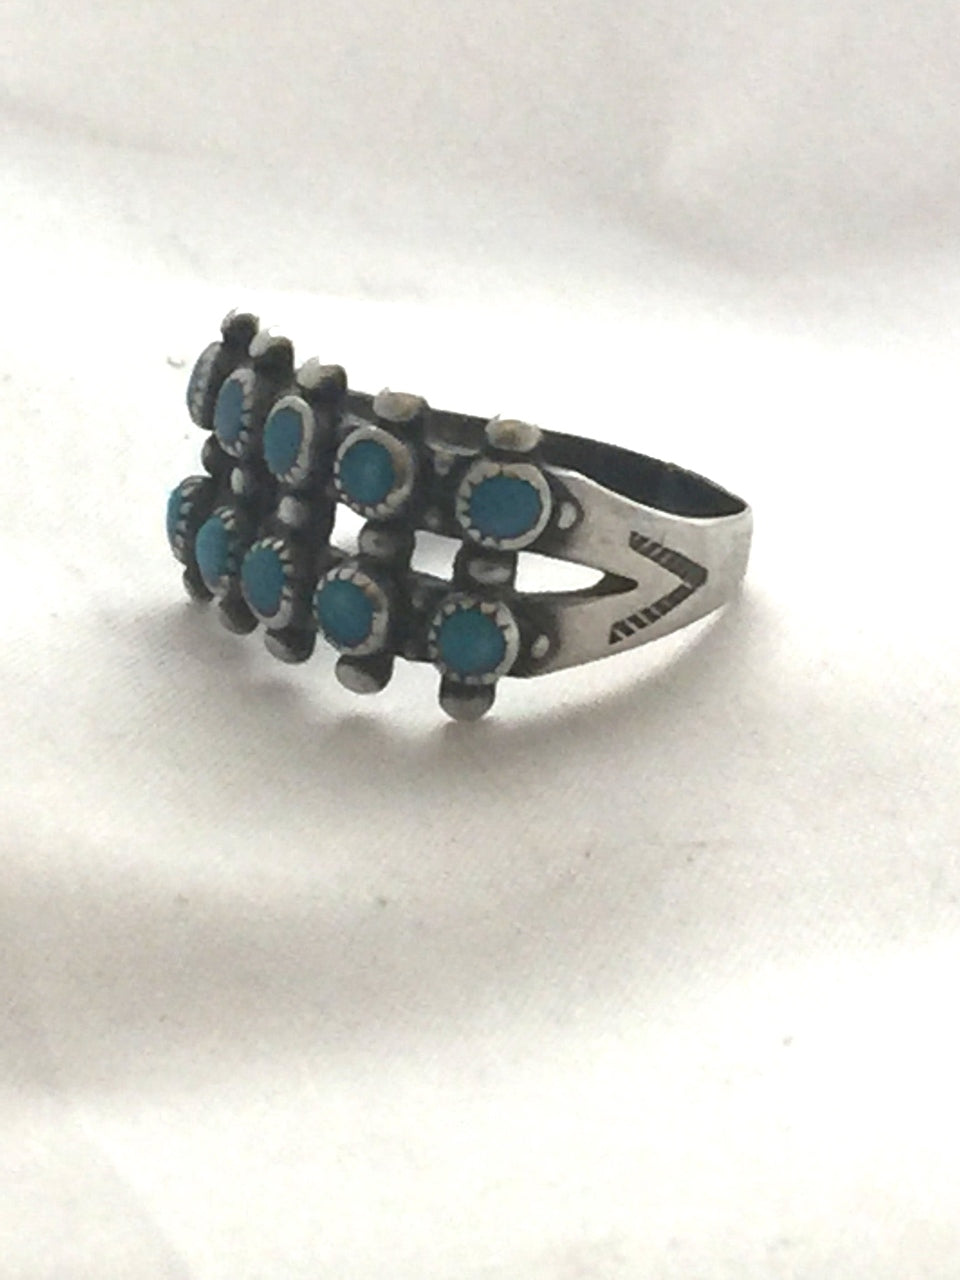 Vintage Sterling Silver Turquoise Southwest Tribal Ring  Petite Pointe Size 6.25  5g